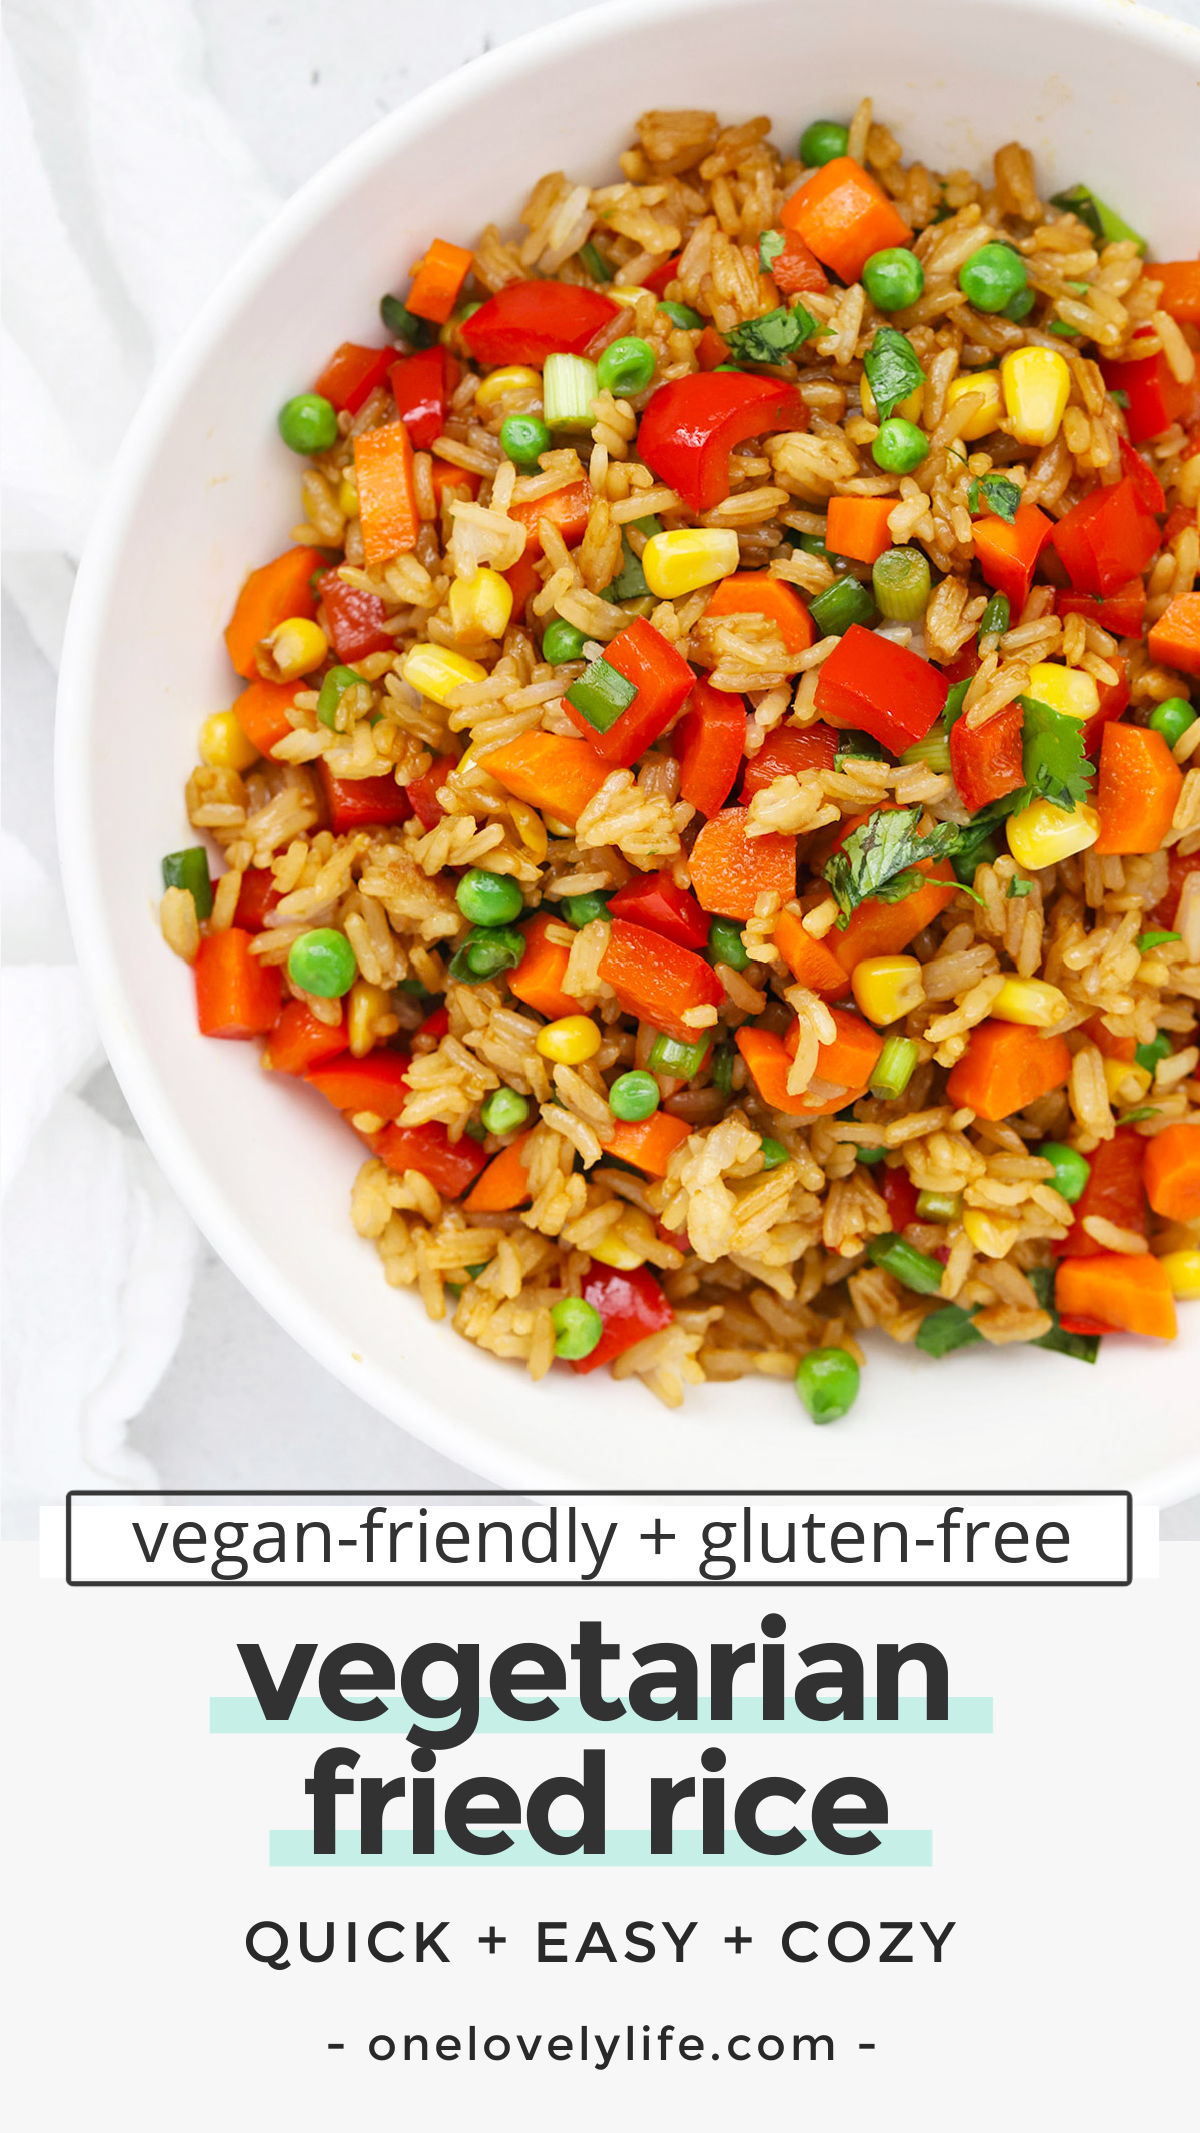 Vegetarian Fried Rice - This healthy fried rice recipe is loaded with colorful veggies and delicious flavor. Serve as a side with all your favorites! (Vegan-Friendly, Gluten-Free) // Vegan Fried Rice // Gluten Free Fried Rice // Easy Dinner // Quick Dinner // Take Out Fake Out // Takeout Copycat Fried Rice